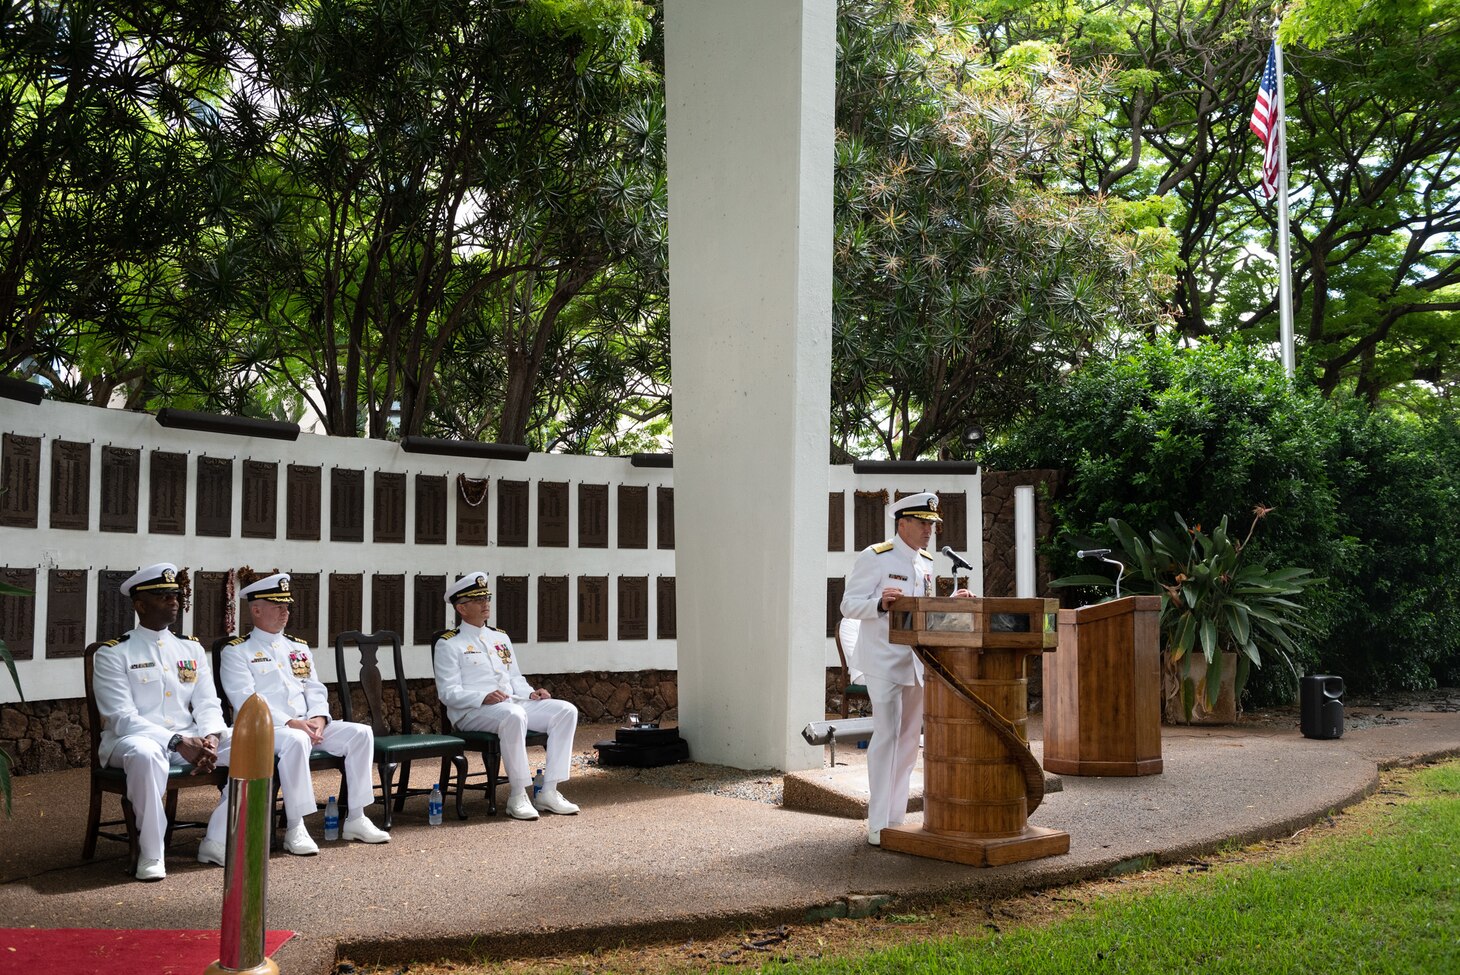 190604-N-KC128-0024 JOINT BASE PEARL HARBOR-HICKAM, Hawaii (June 4, 2019) Rear Adm. Blake L. Converse, commander of Submarine Force, U.S. Pacific Fleet, delivers remarks during the change of command ceremony of Naval Submarine Training Center Pacific (NSTCP) held a change of command ceremony at Parche Memorial on Joint Base Pearl Harbor-Hickam, Hawaii, June 4, 2019. Capt. Andrew Hertel, commanding officer of Naval Submarine Training Center Pacific, was relieved by Capt. Lance Thompson, after more than 30 months in command. (U.S. Navy Photo by Mass Communication Specialist 1st Class Daniel Hinton)